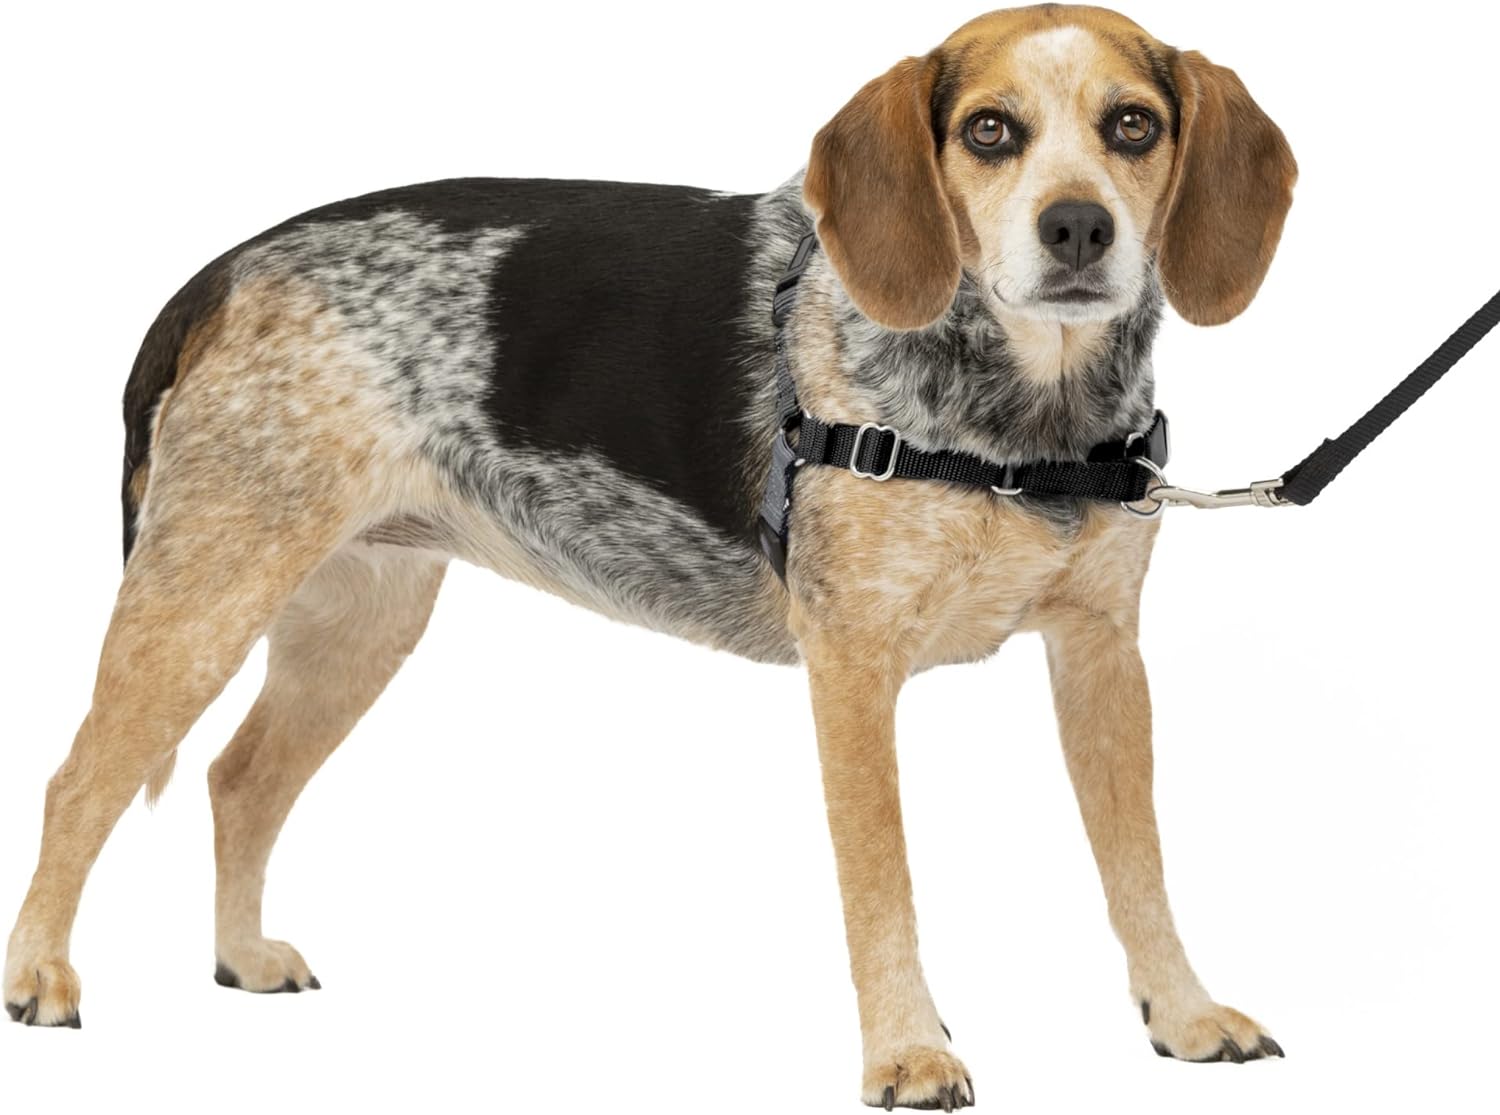 PetSafe Easy Walk No-Pull Dog Harness - The Ultimate Harness to Help Stop Pulling - Take Control  Teach Better Leash Manners - Helps Prevent Pets Pulling on Walks - Small/Medium, Charcoal/Black